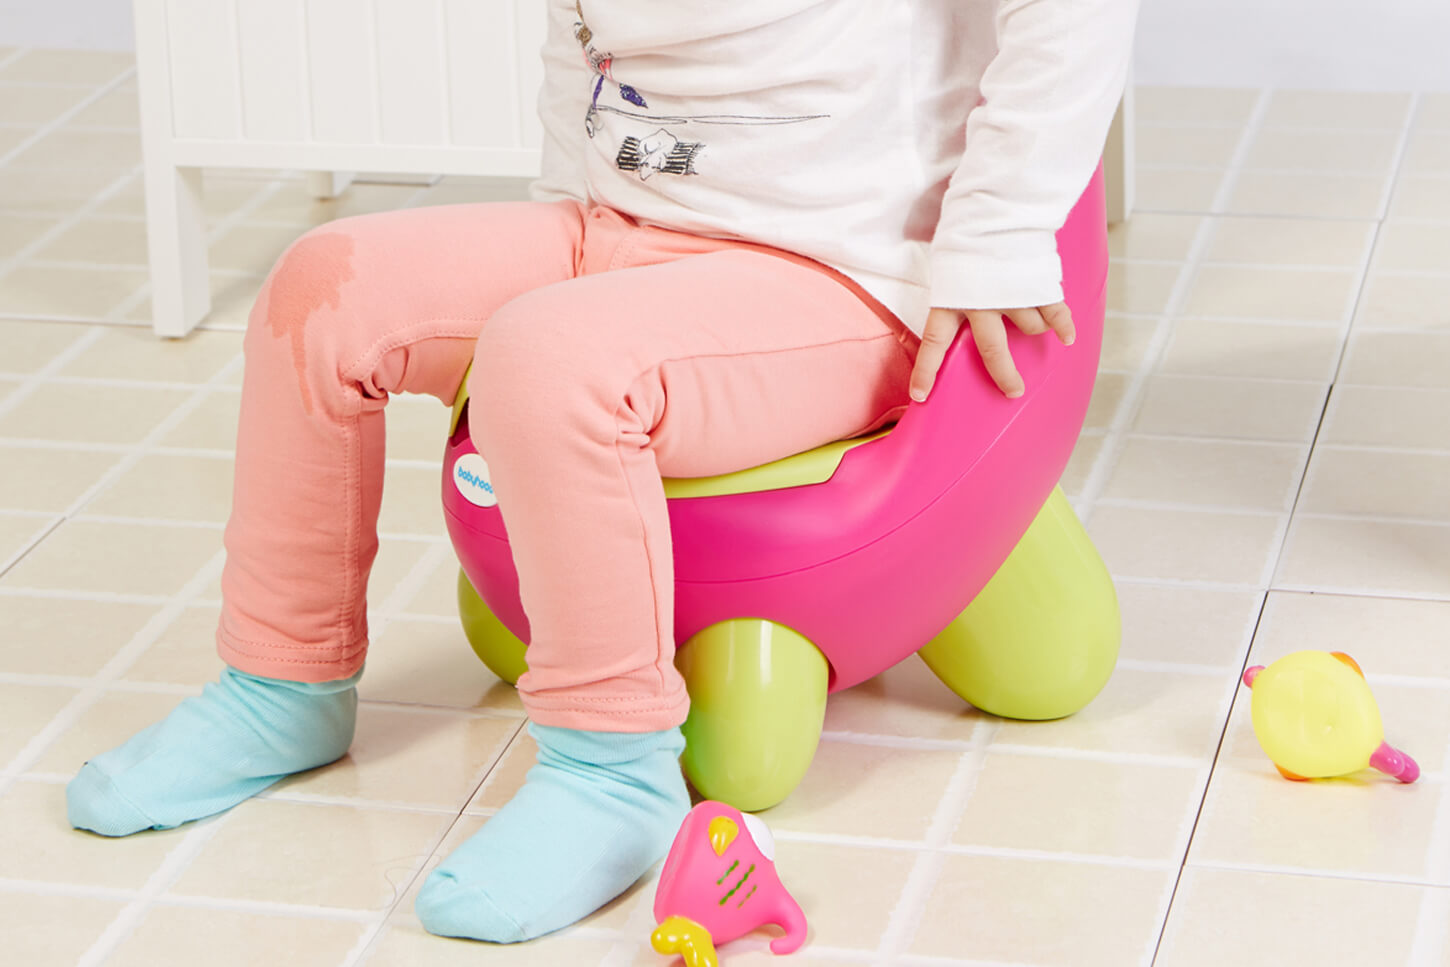 Overview of Babyhood's QQ Potty